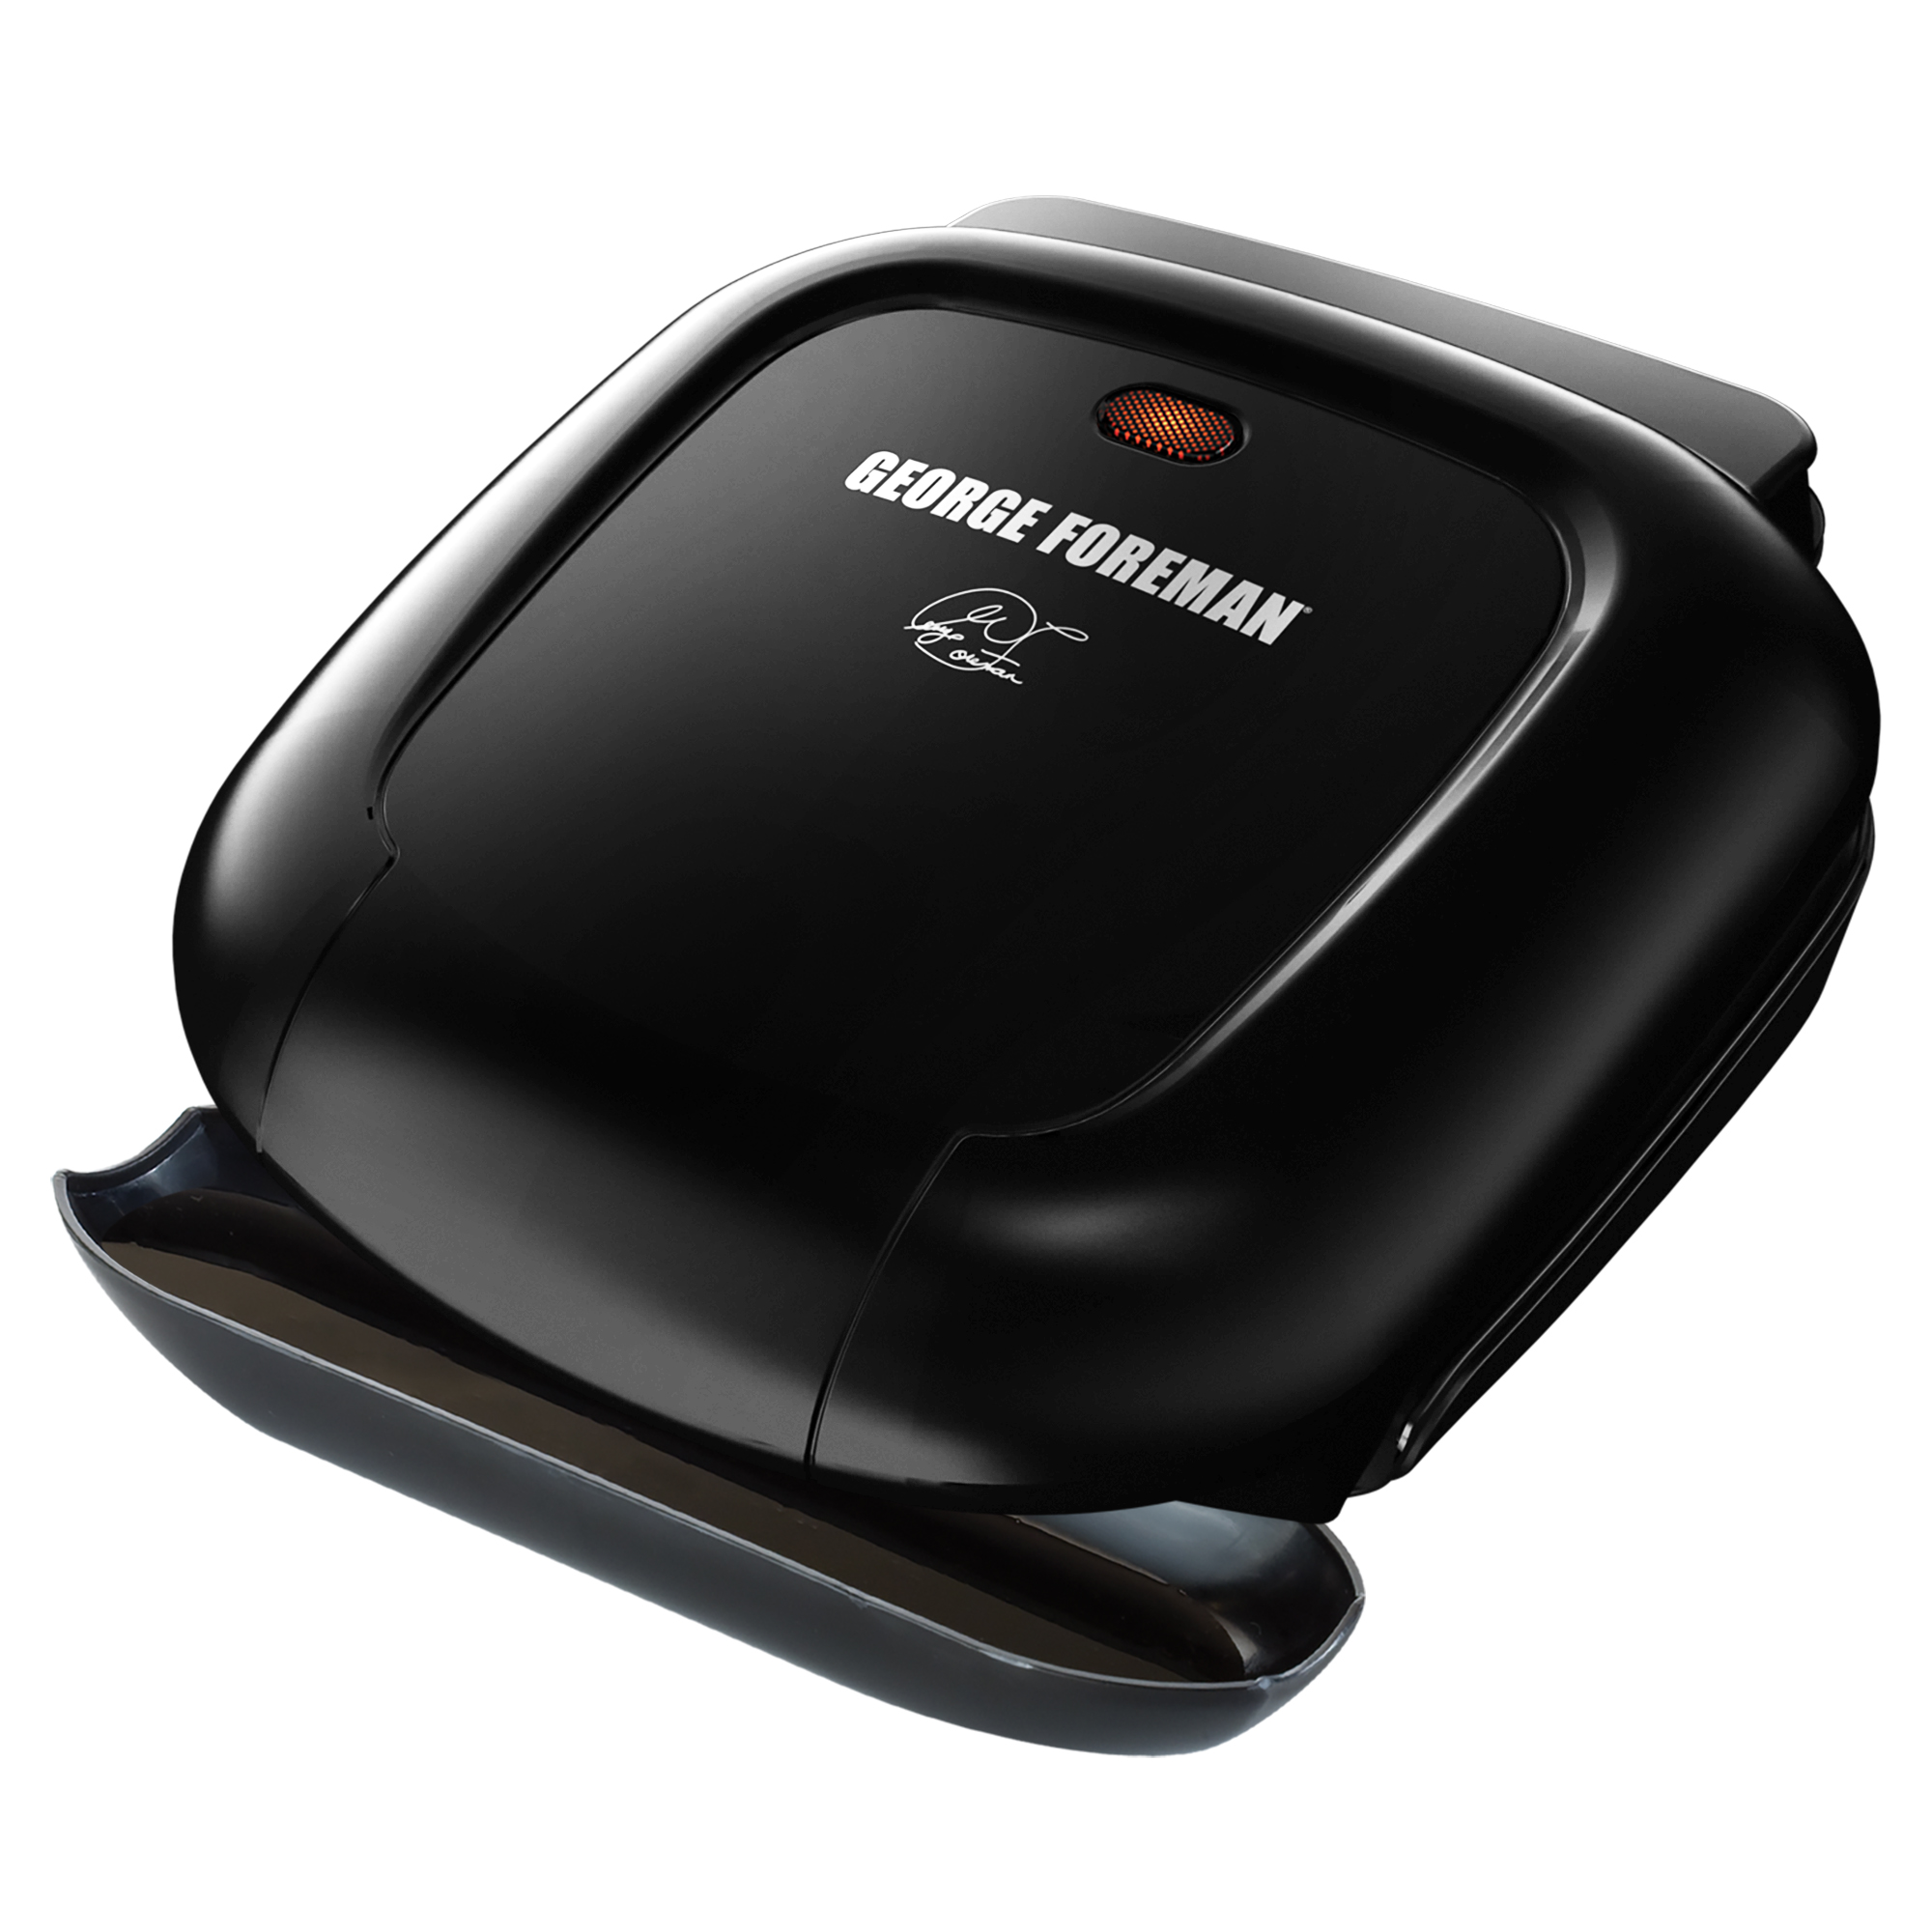 George Foreman GR0040B 2-Serving Classic Plate Grill